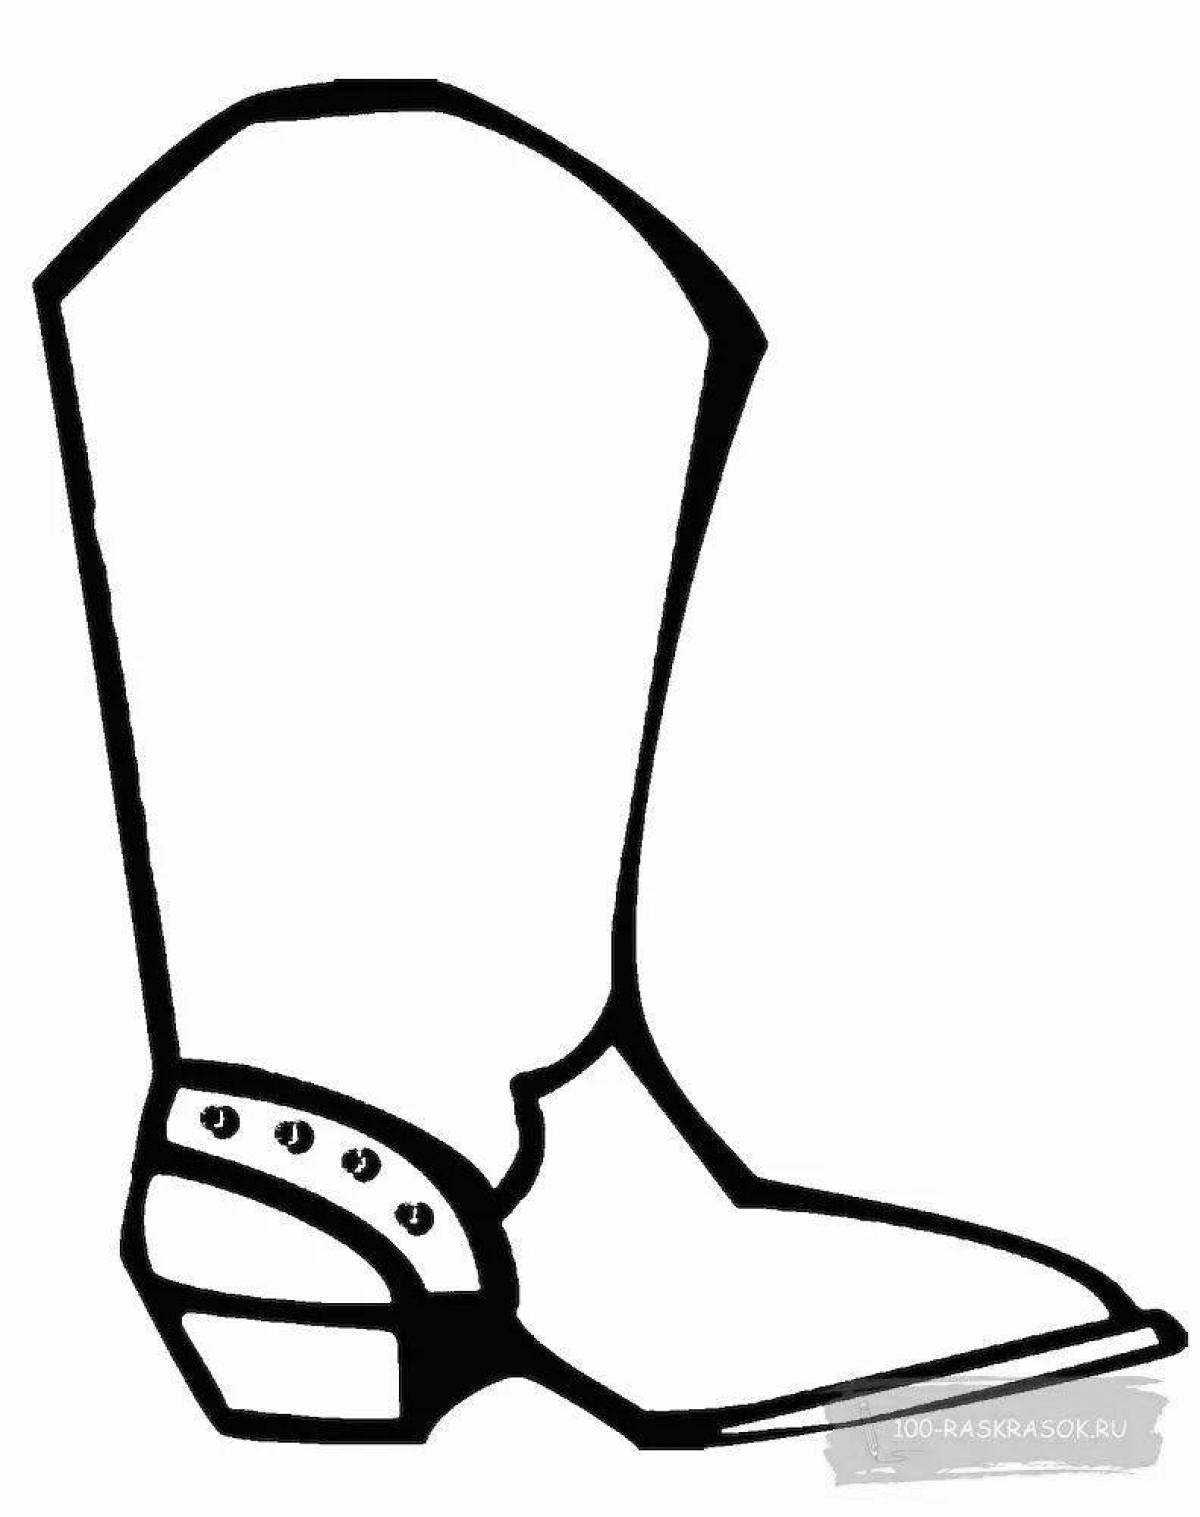 Coloring page attractive walking boots